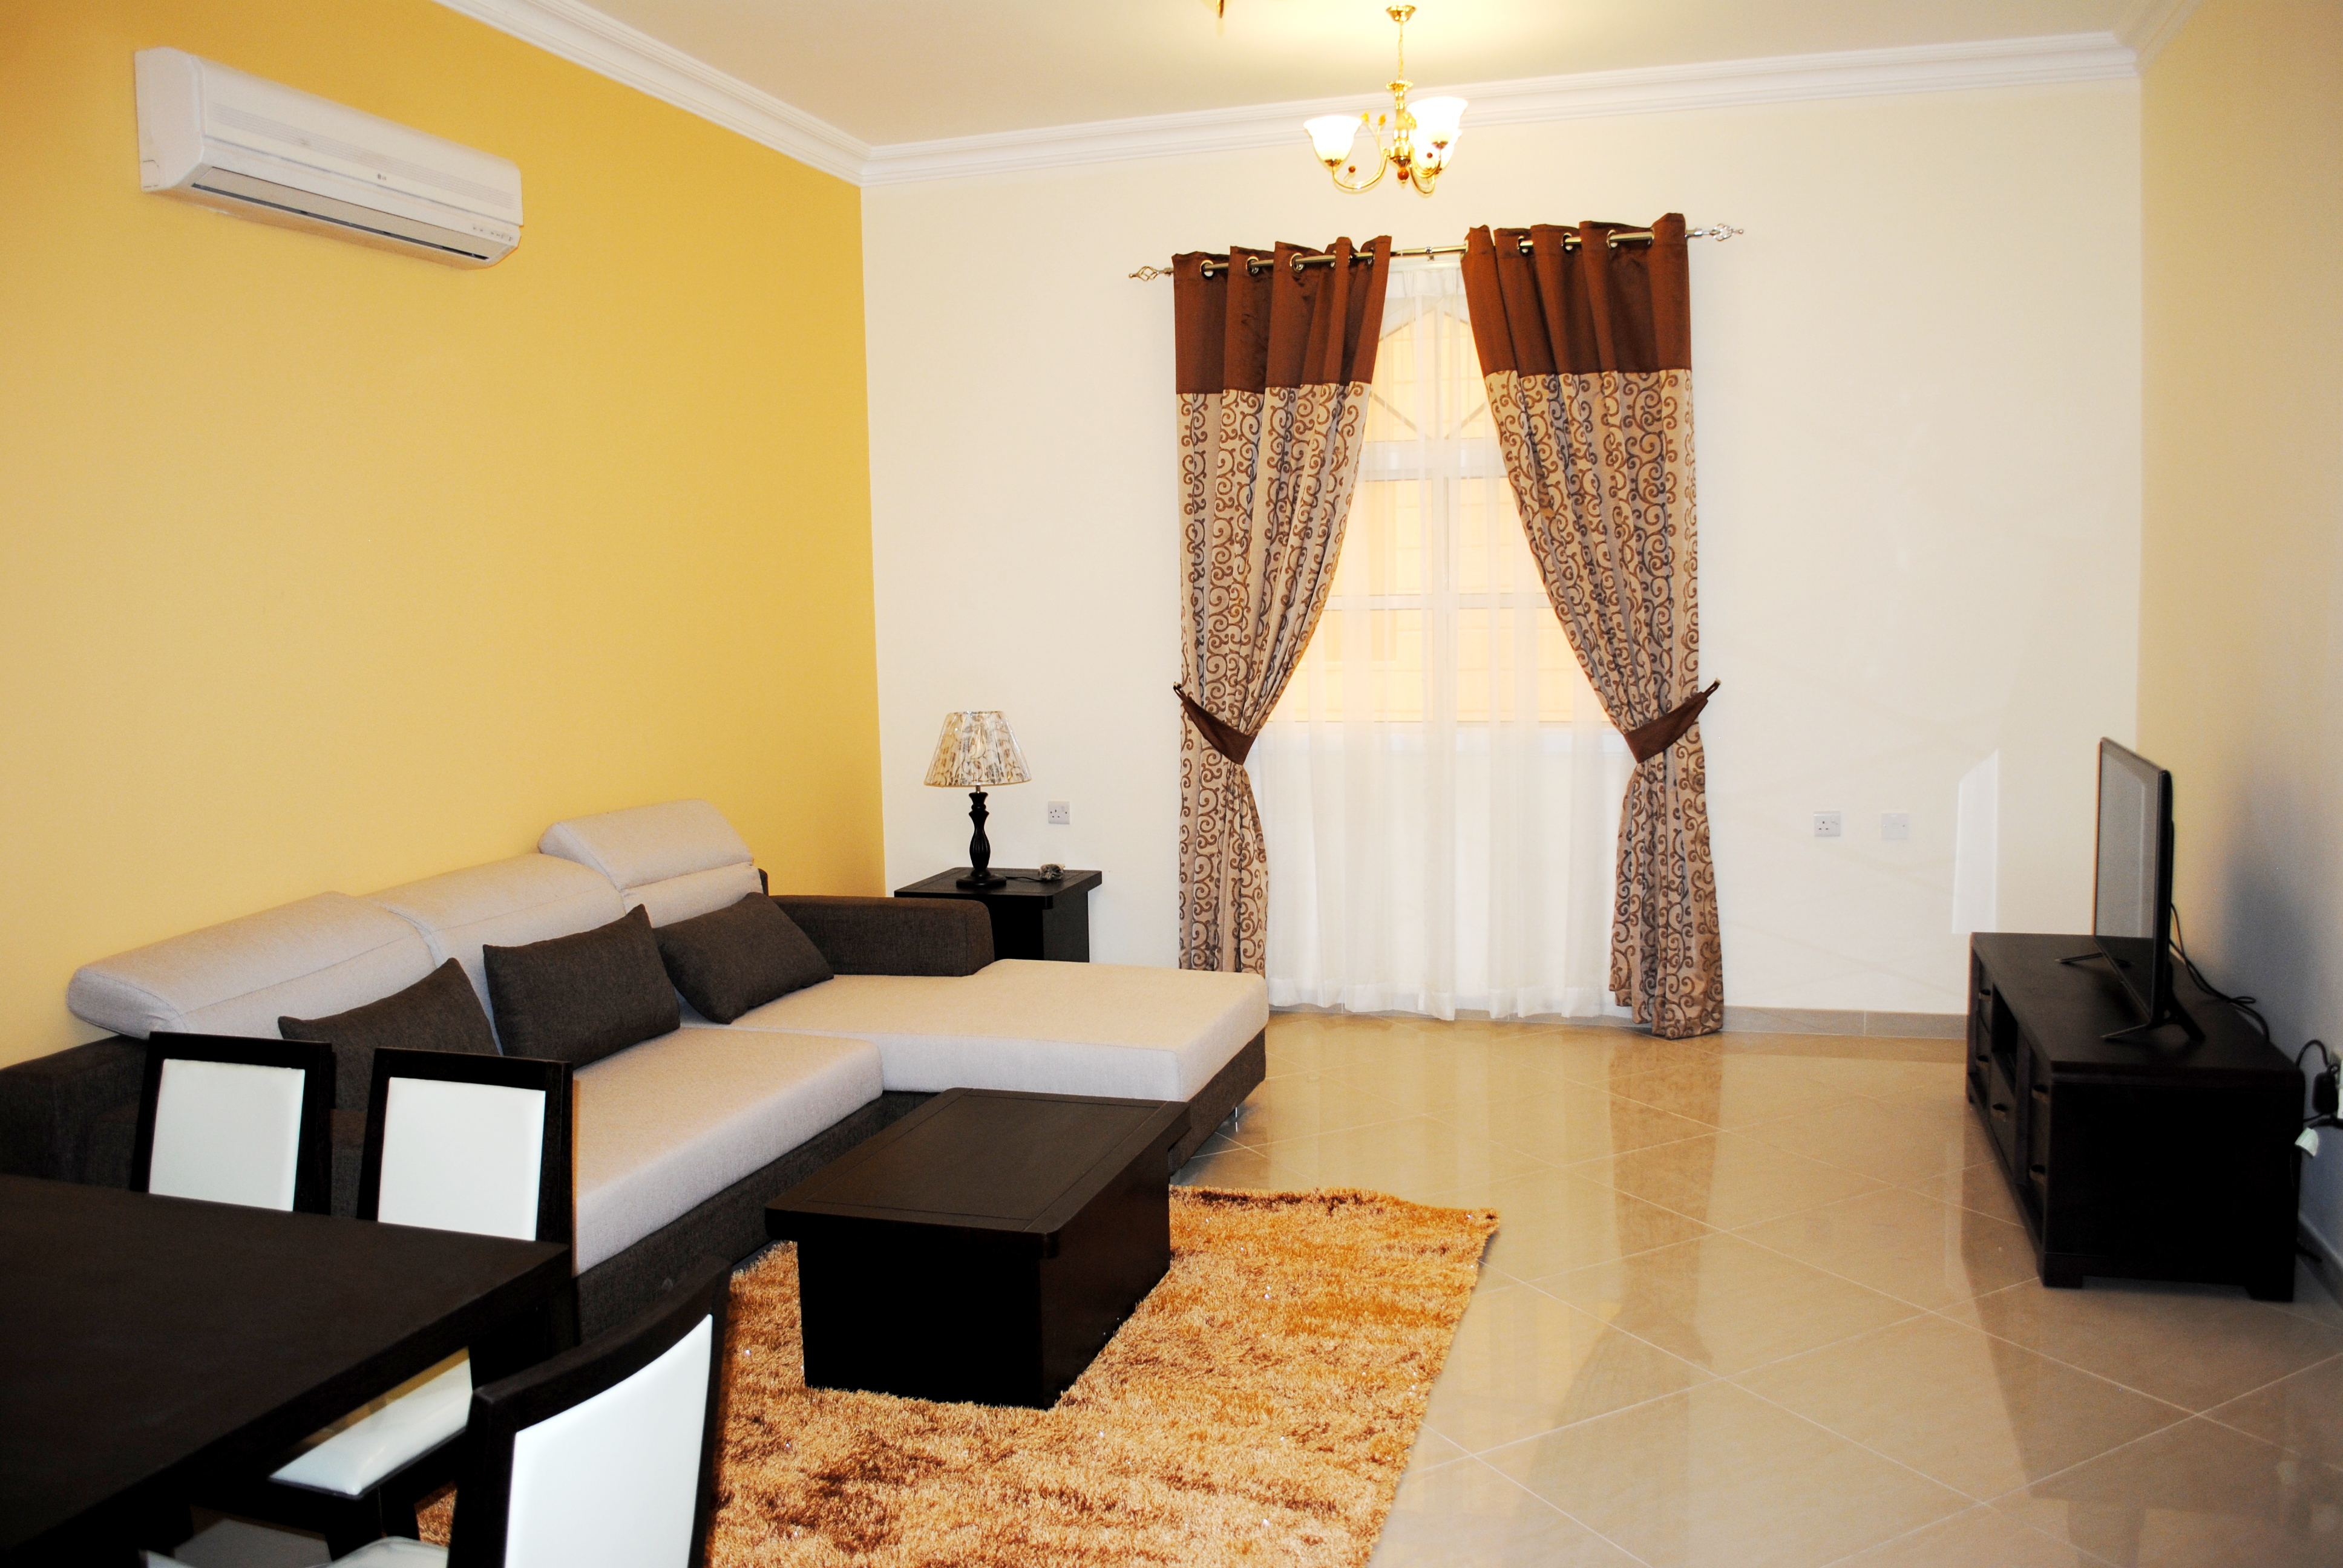 3 bedrooms fully furnished apartments in P-141